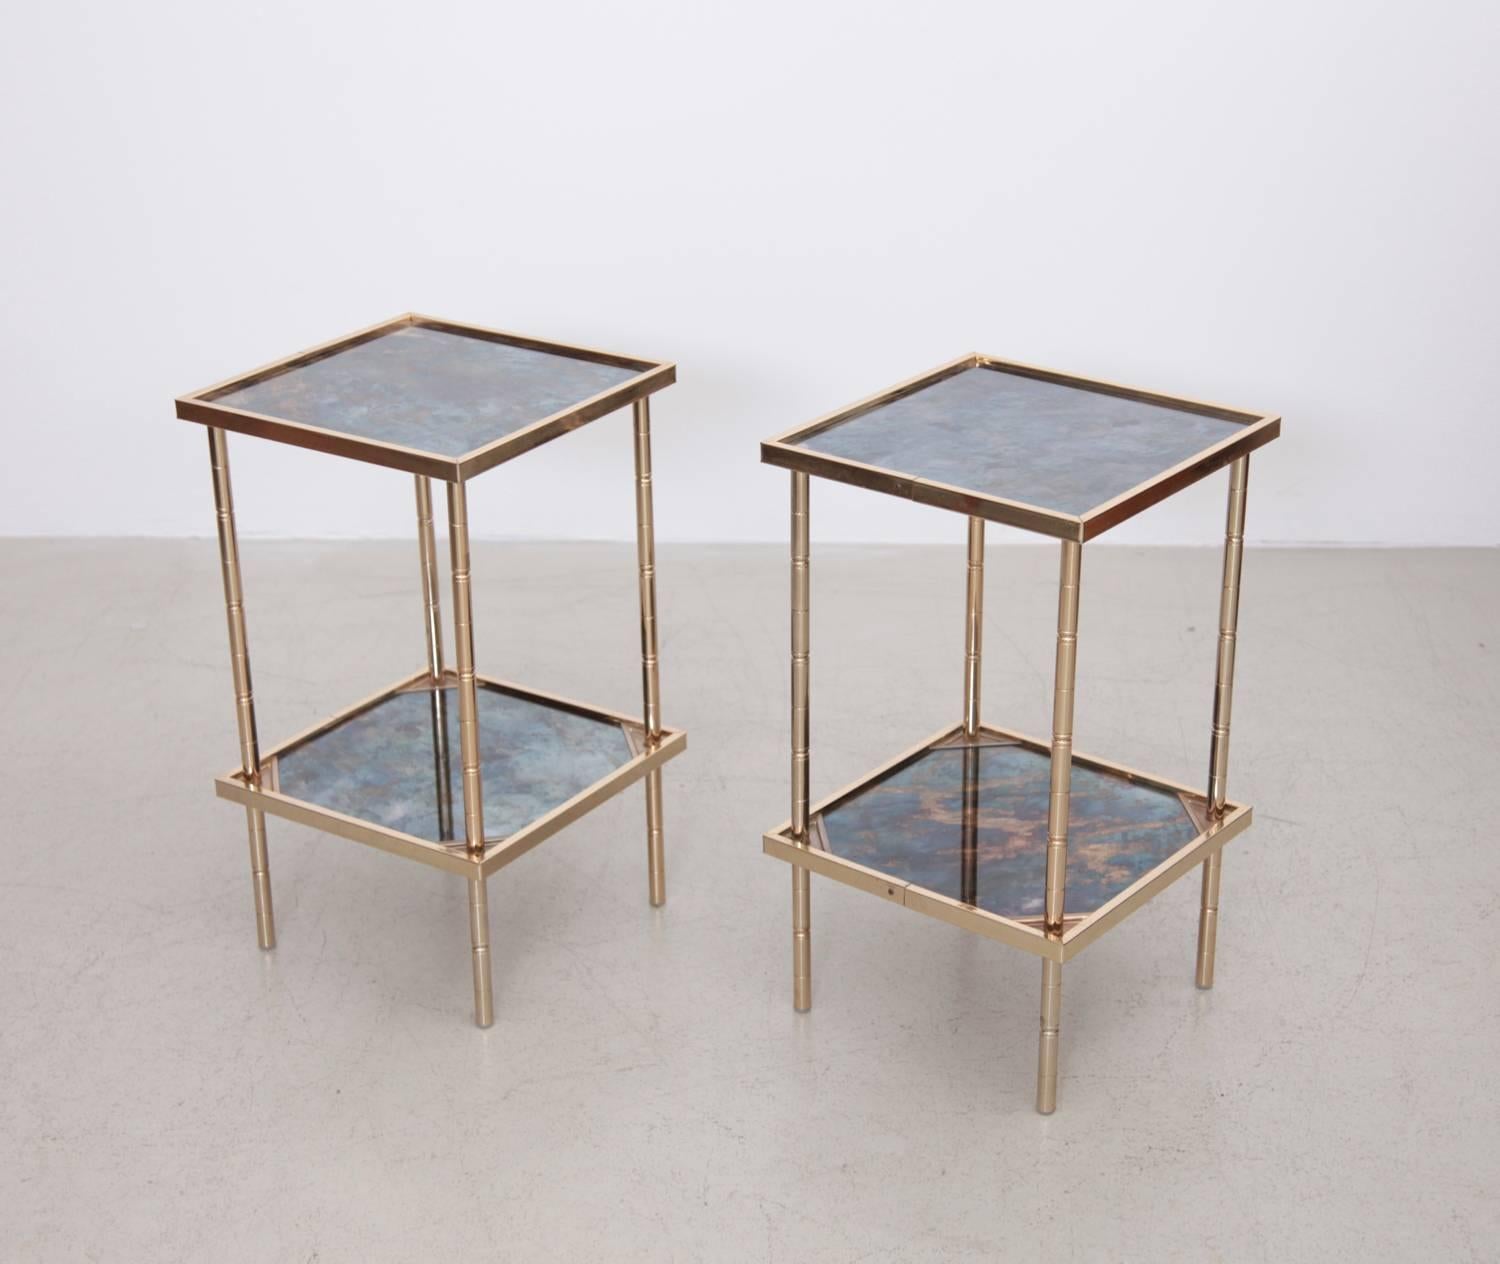 Wonderful pair of side tables or nightstands in brass with marbled glass. The tables are in excellent condition.